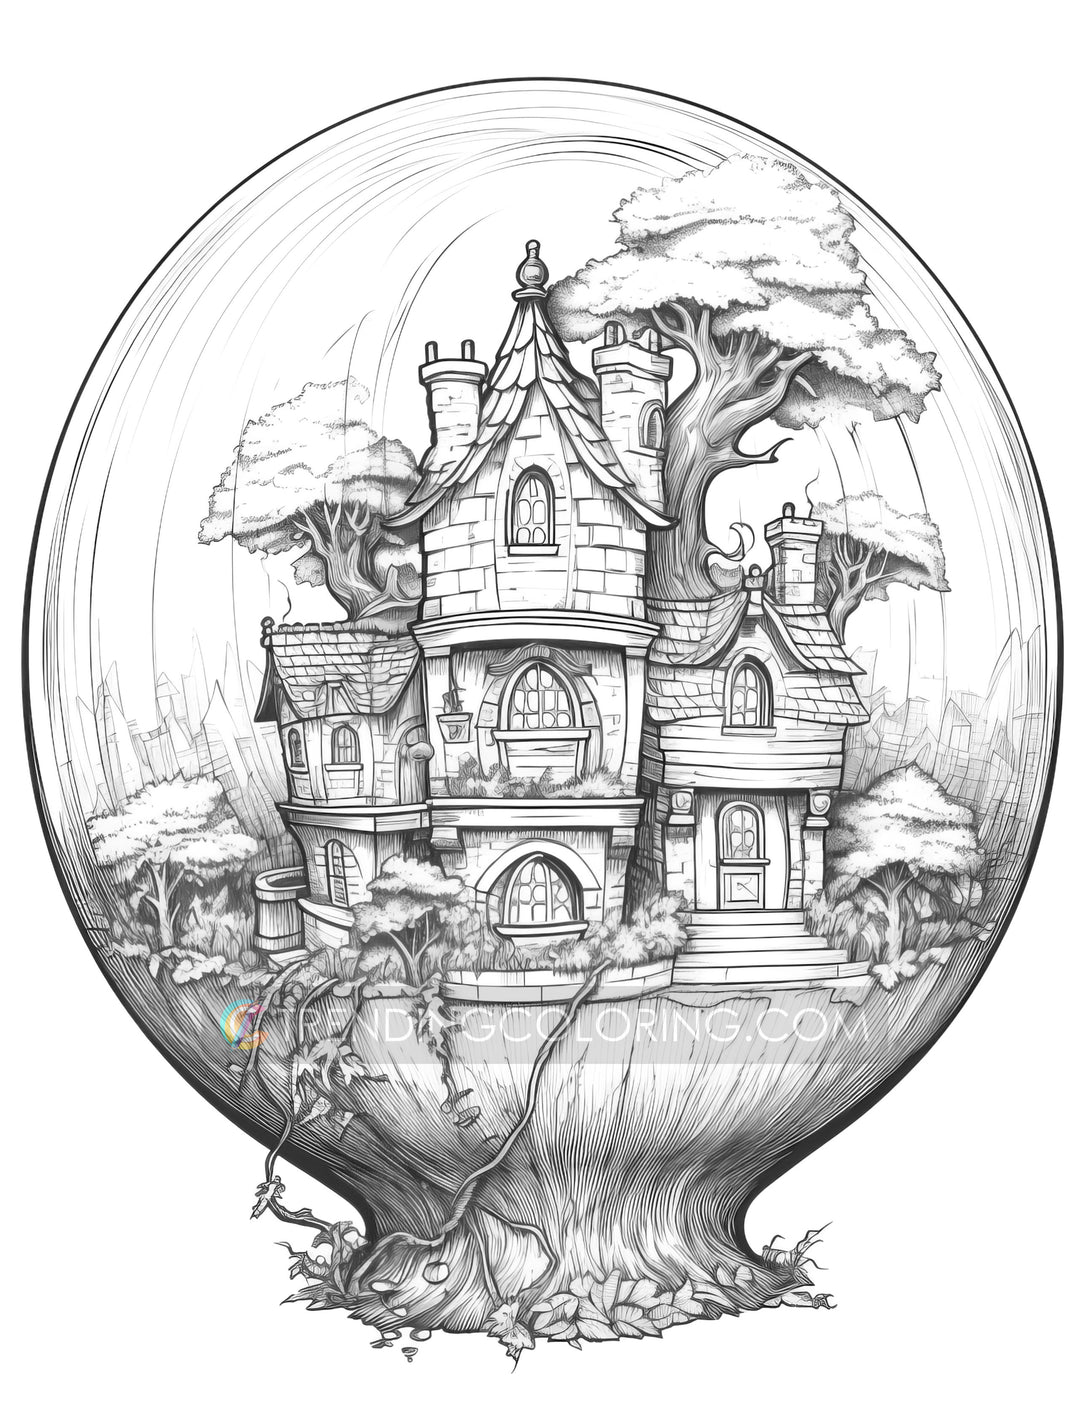 Ink Tracing : Reverse Fantasy Fairy Homes Coloring Book for Adults: Follow  the White Lines and Unleash Your Creative Journey in this Magical Reverse   by COLORFUL MIND STUDIO